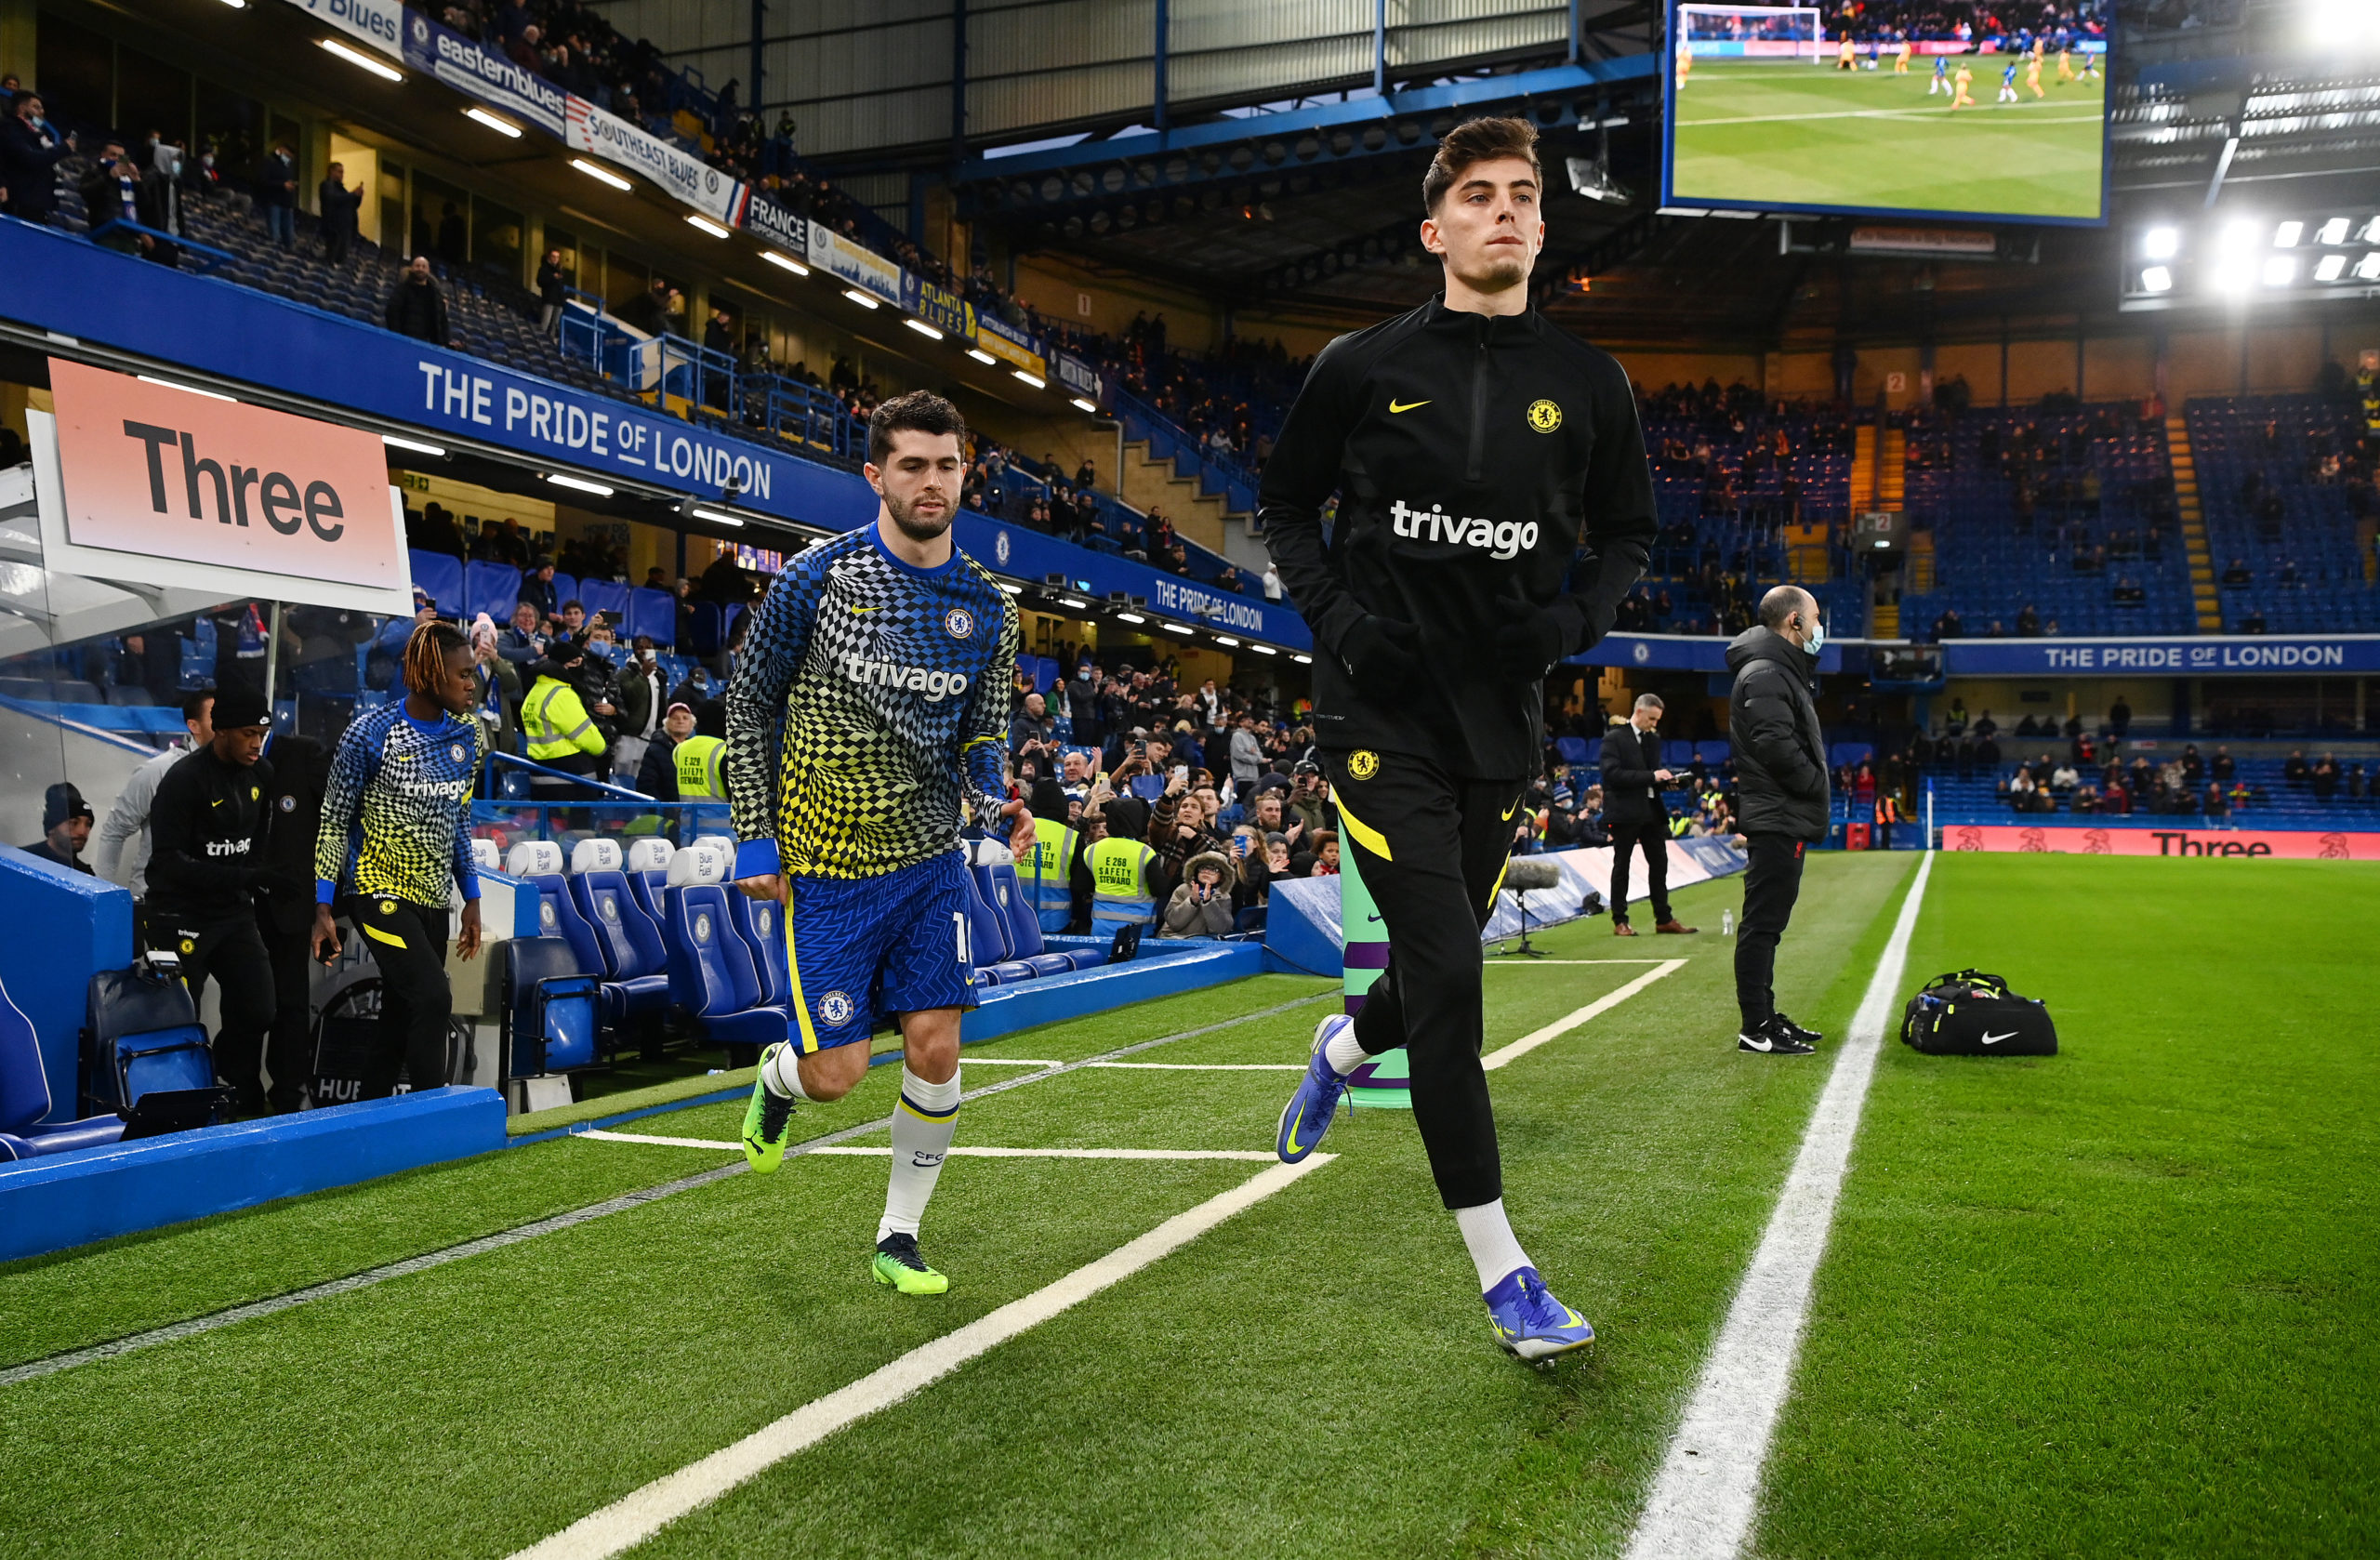 Tuchel says Chelsea duo are getting 'stronger' and now reaching their 'best level'